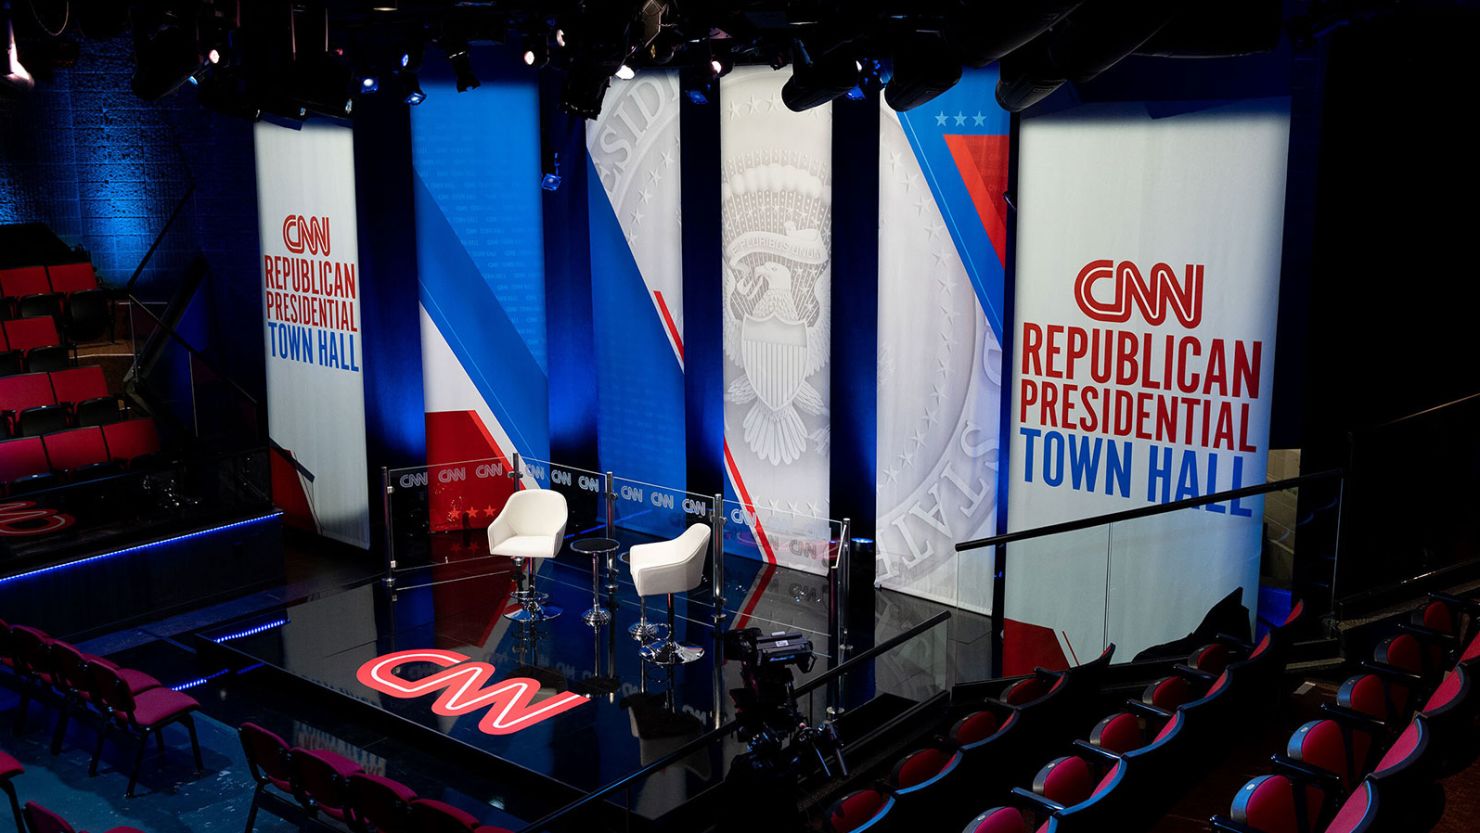 The stage ahead of CNN's Republican Presidential Town Hall with former Vice President Mike Pence that will take place on June 7 at Grand View University in Des Moines, Iowa.